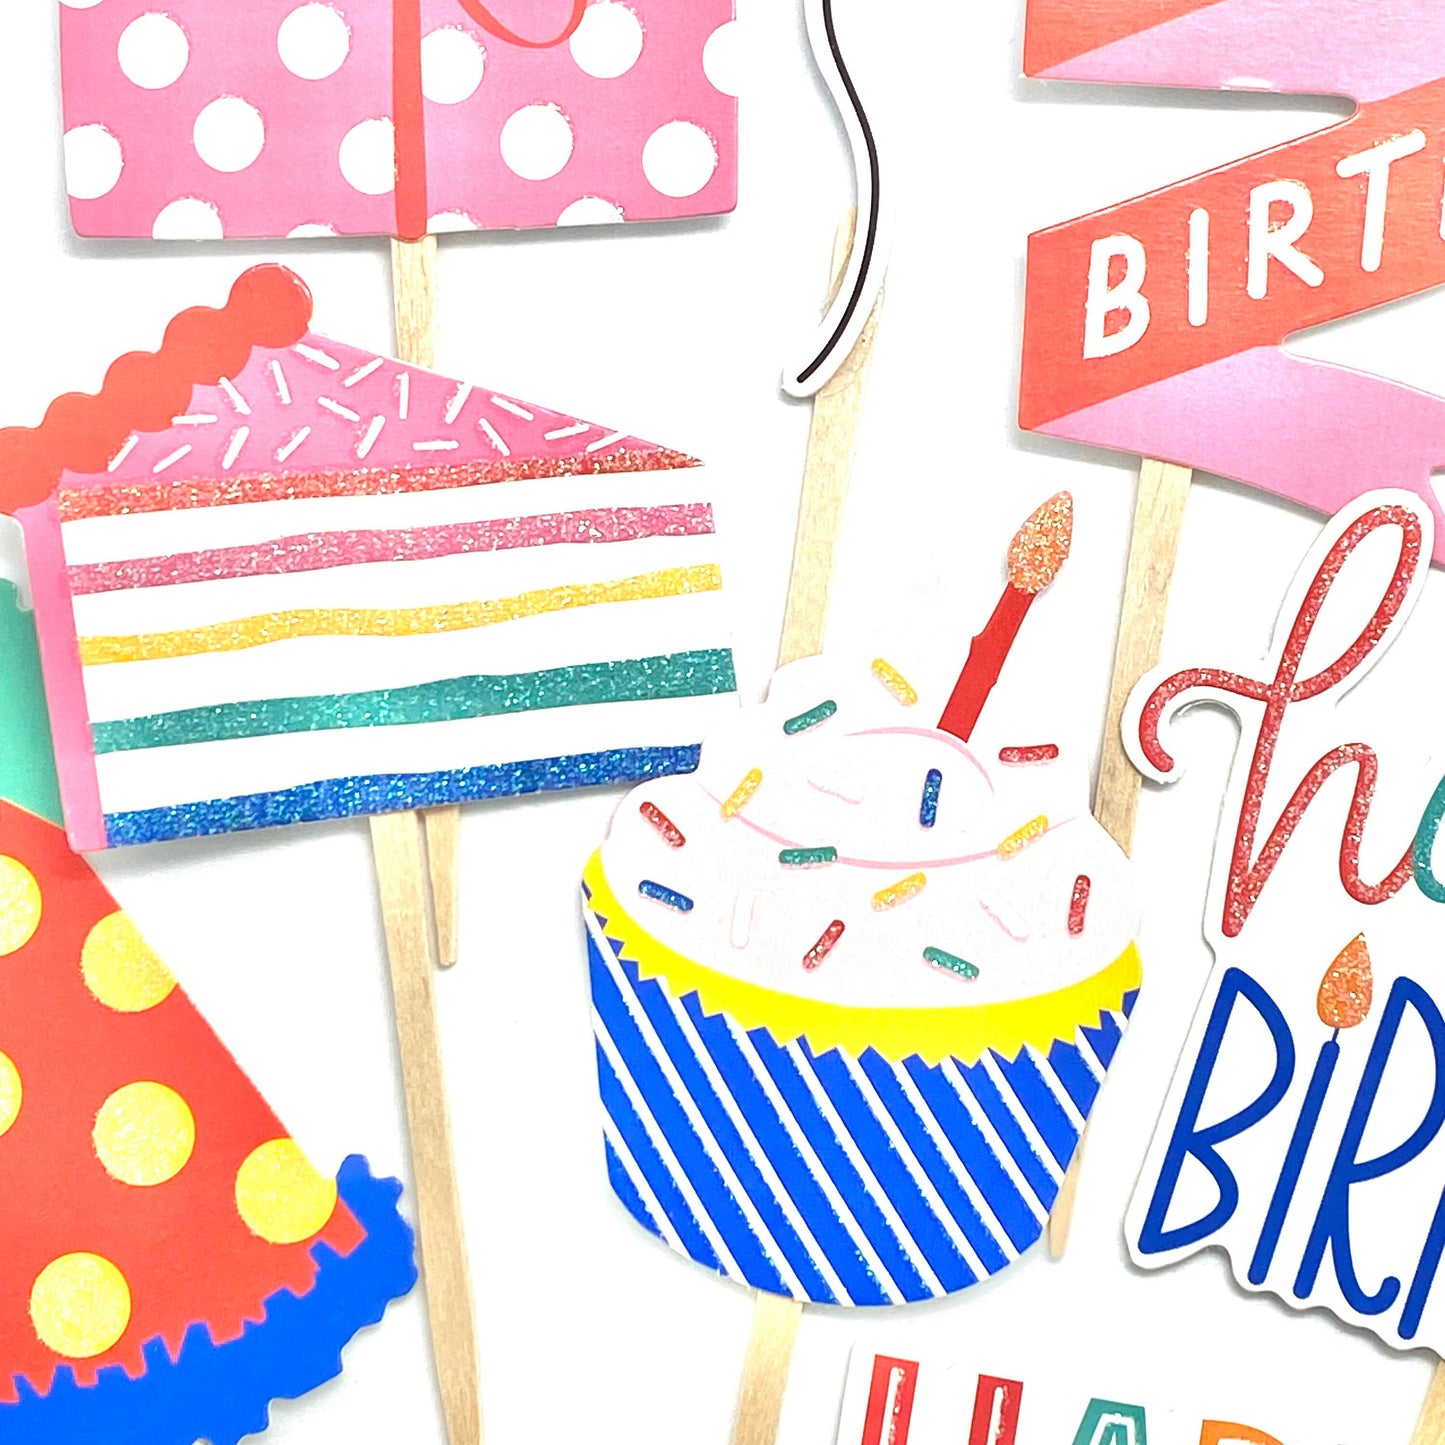 Birthday Cake Toppers, Happy Birthday Cupcake Toppers, Primary Colors Birthday Party Decor - Party Hats, Balloons, Presents Sticker Set